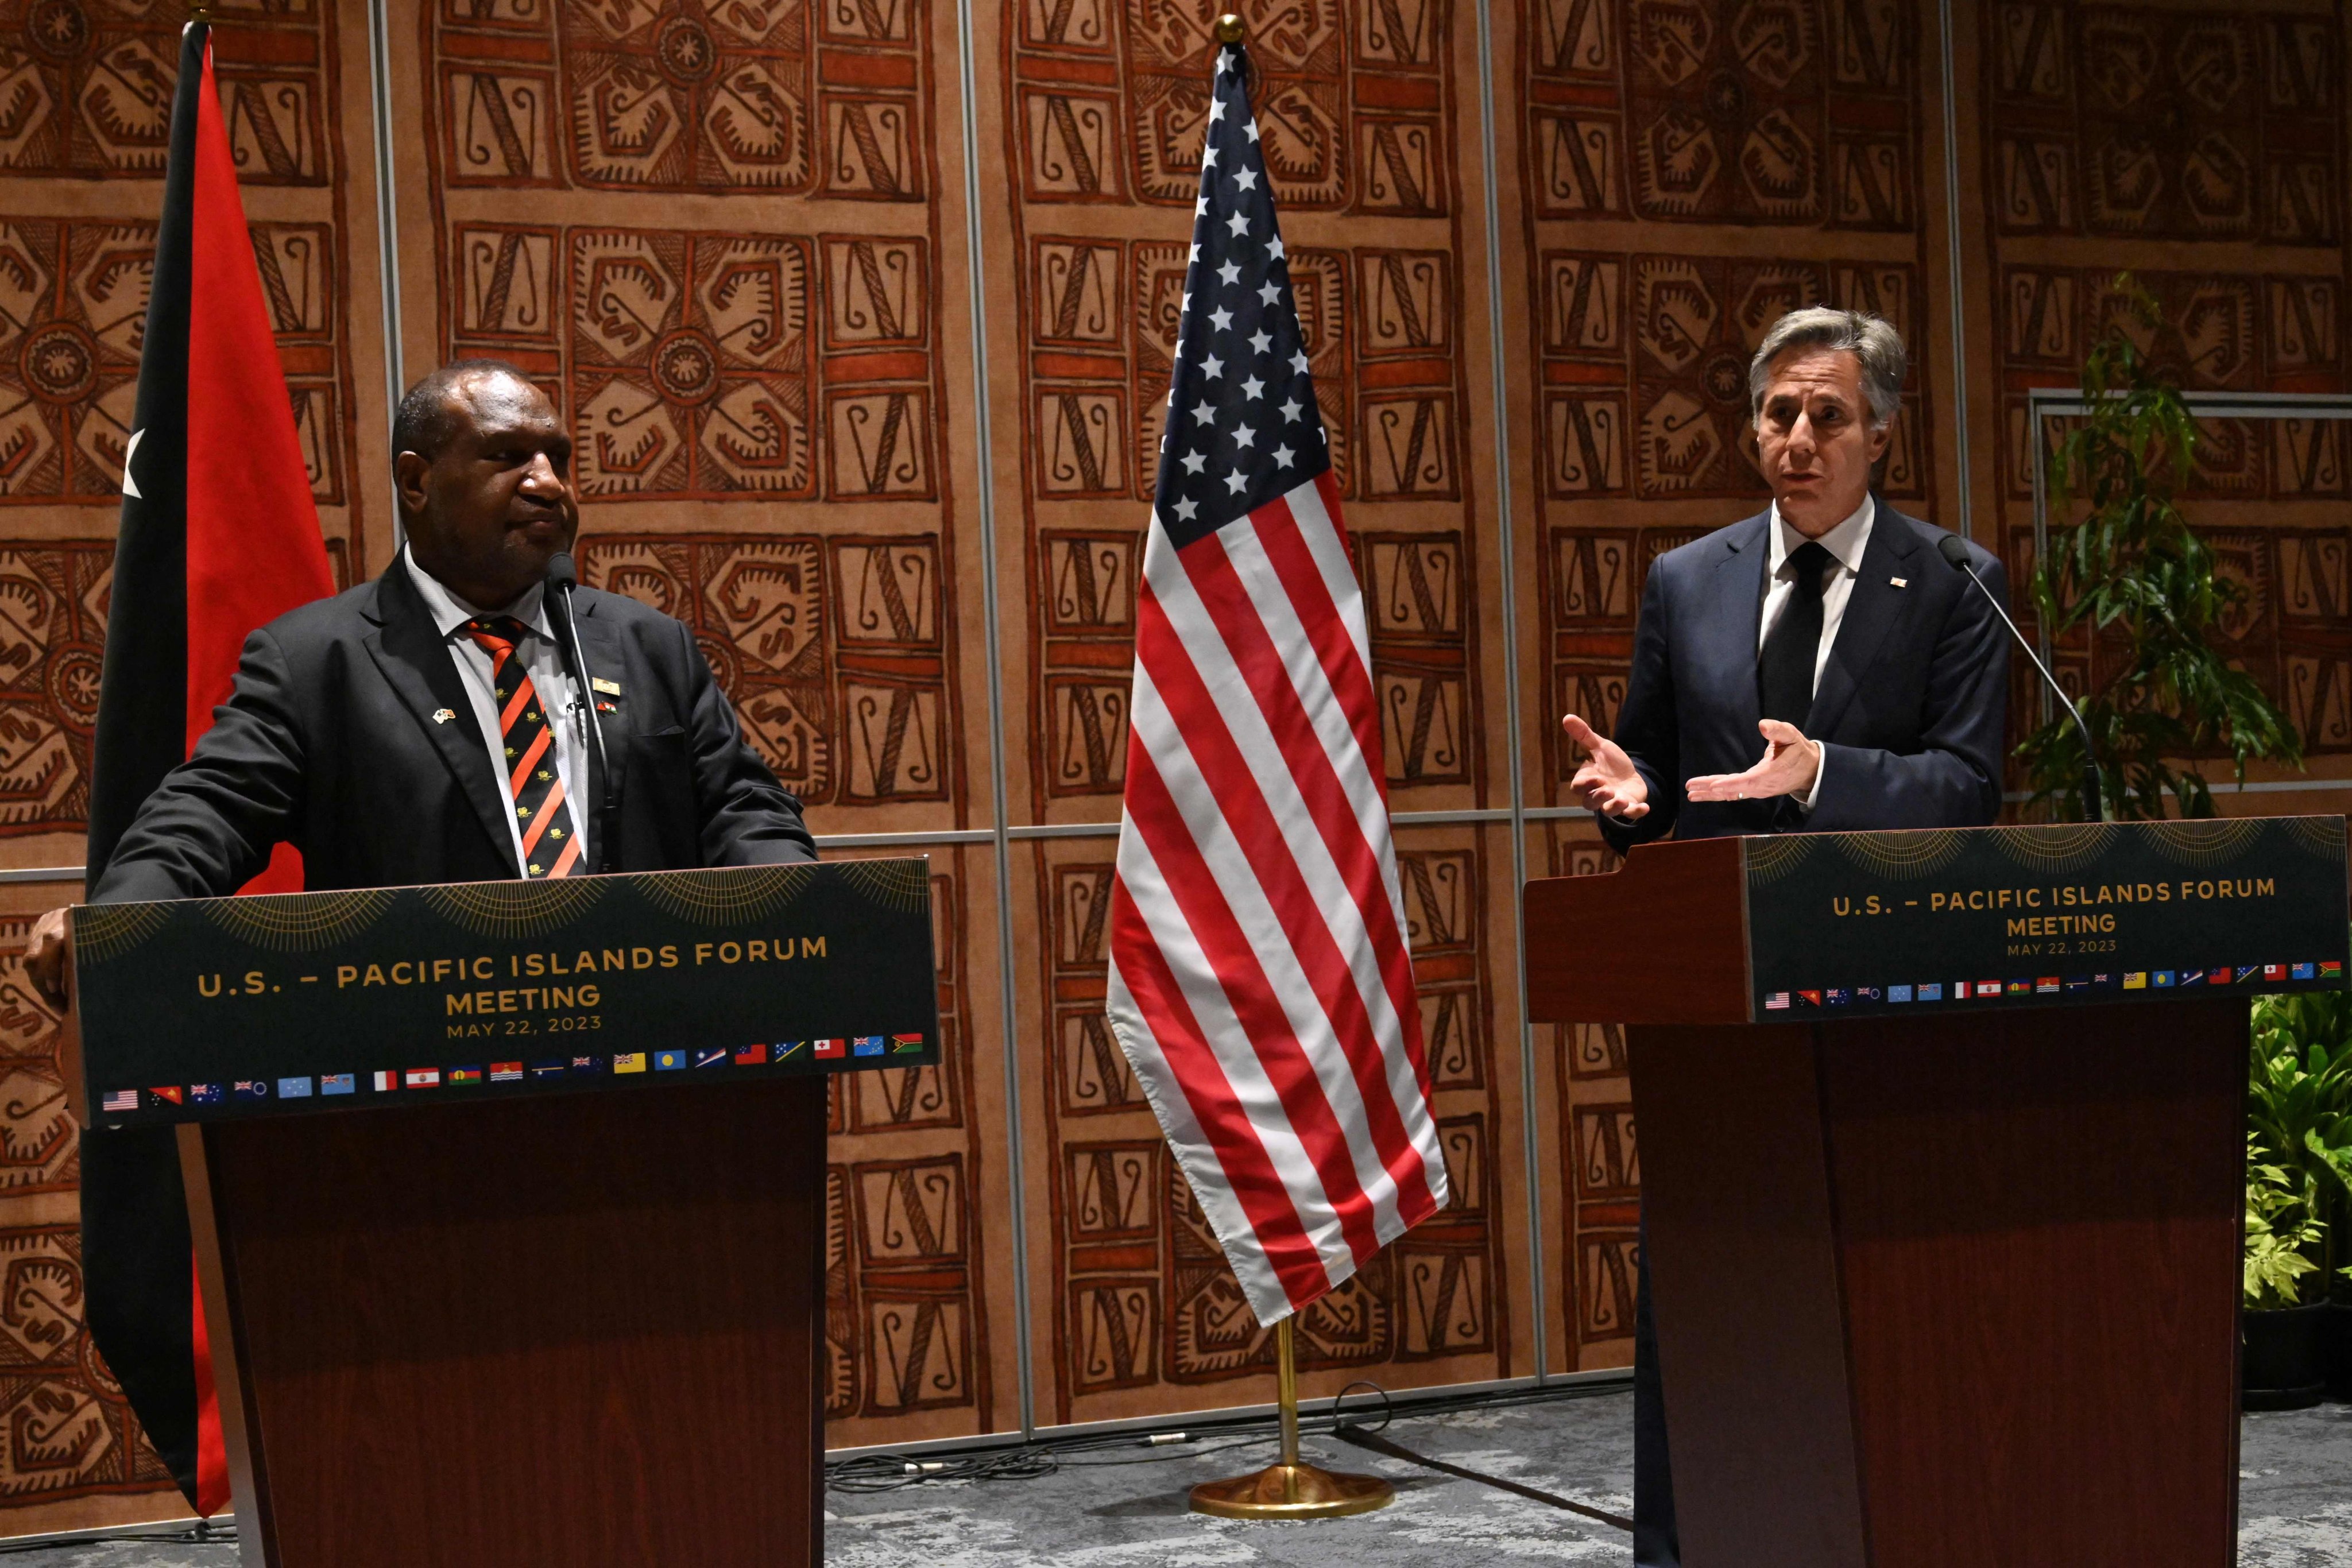 PNG’s Prime Minister James Marape (left) looks on as US Secretary of State Antony Blinken (right) speaks during a joint press conference following the US-Pacific Islands Forum at the Apec Haus in Port Moresby on May 22, 2023. Photo: AFP